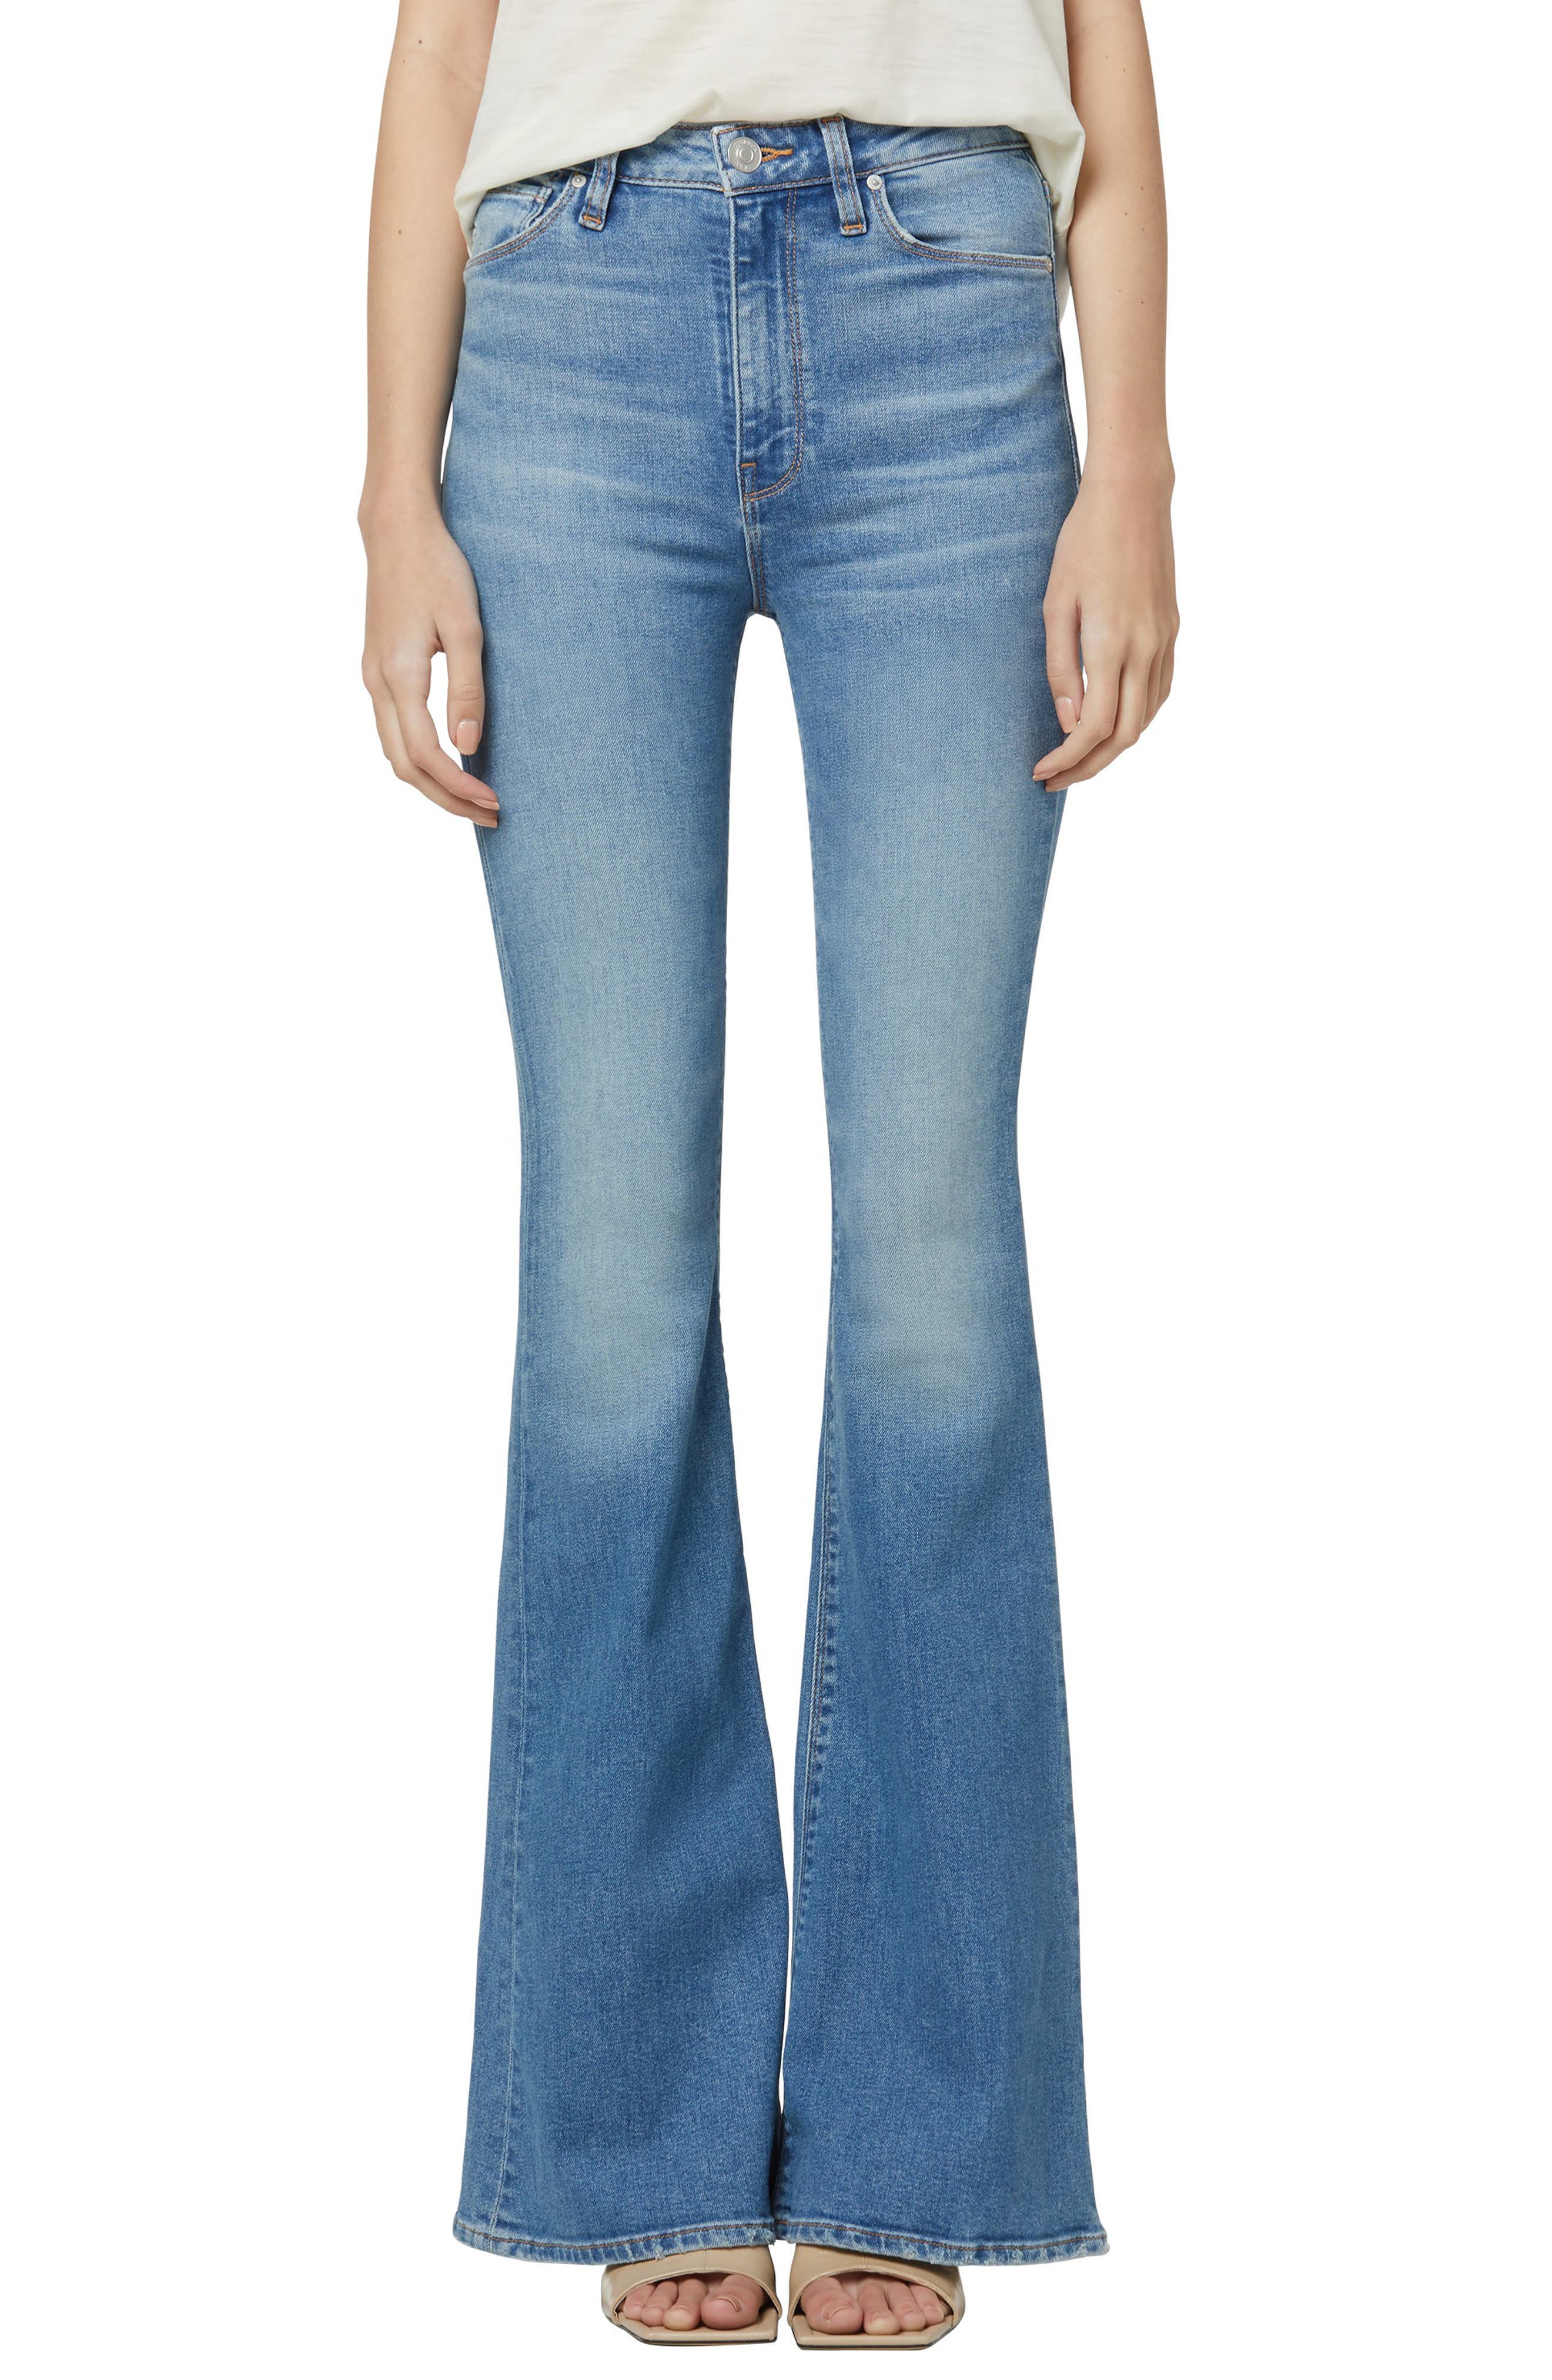 Women's Jeans at Search By Inseam